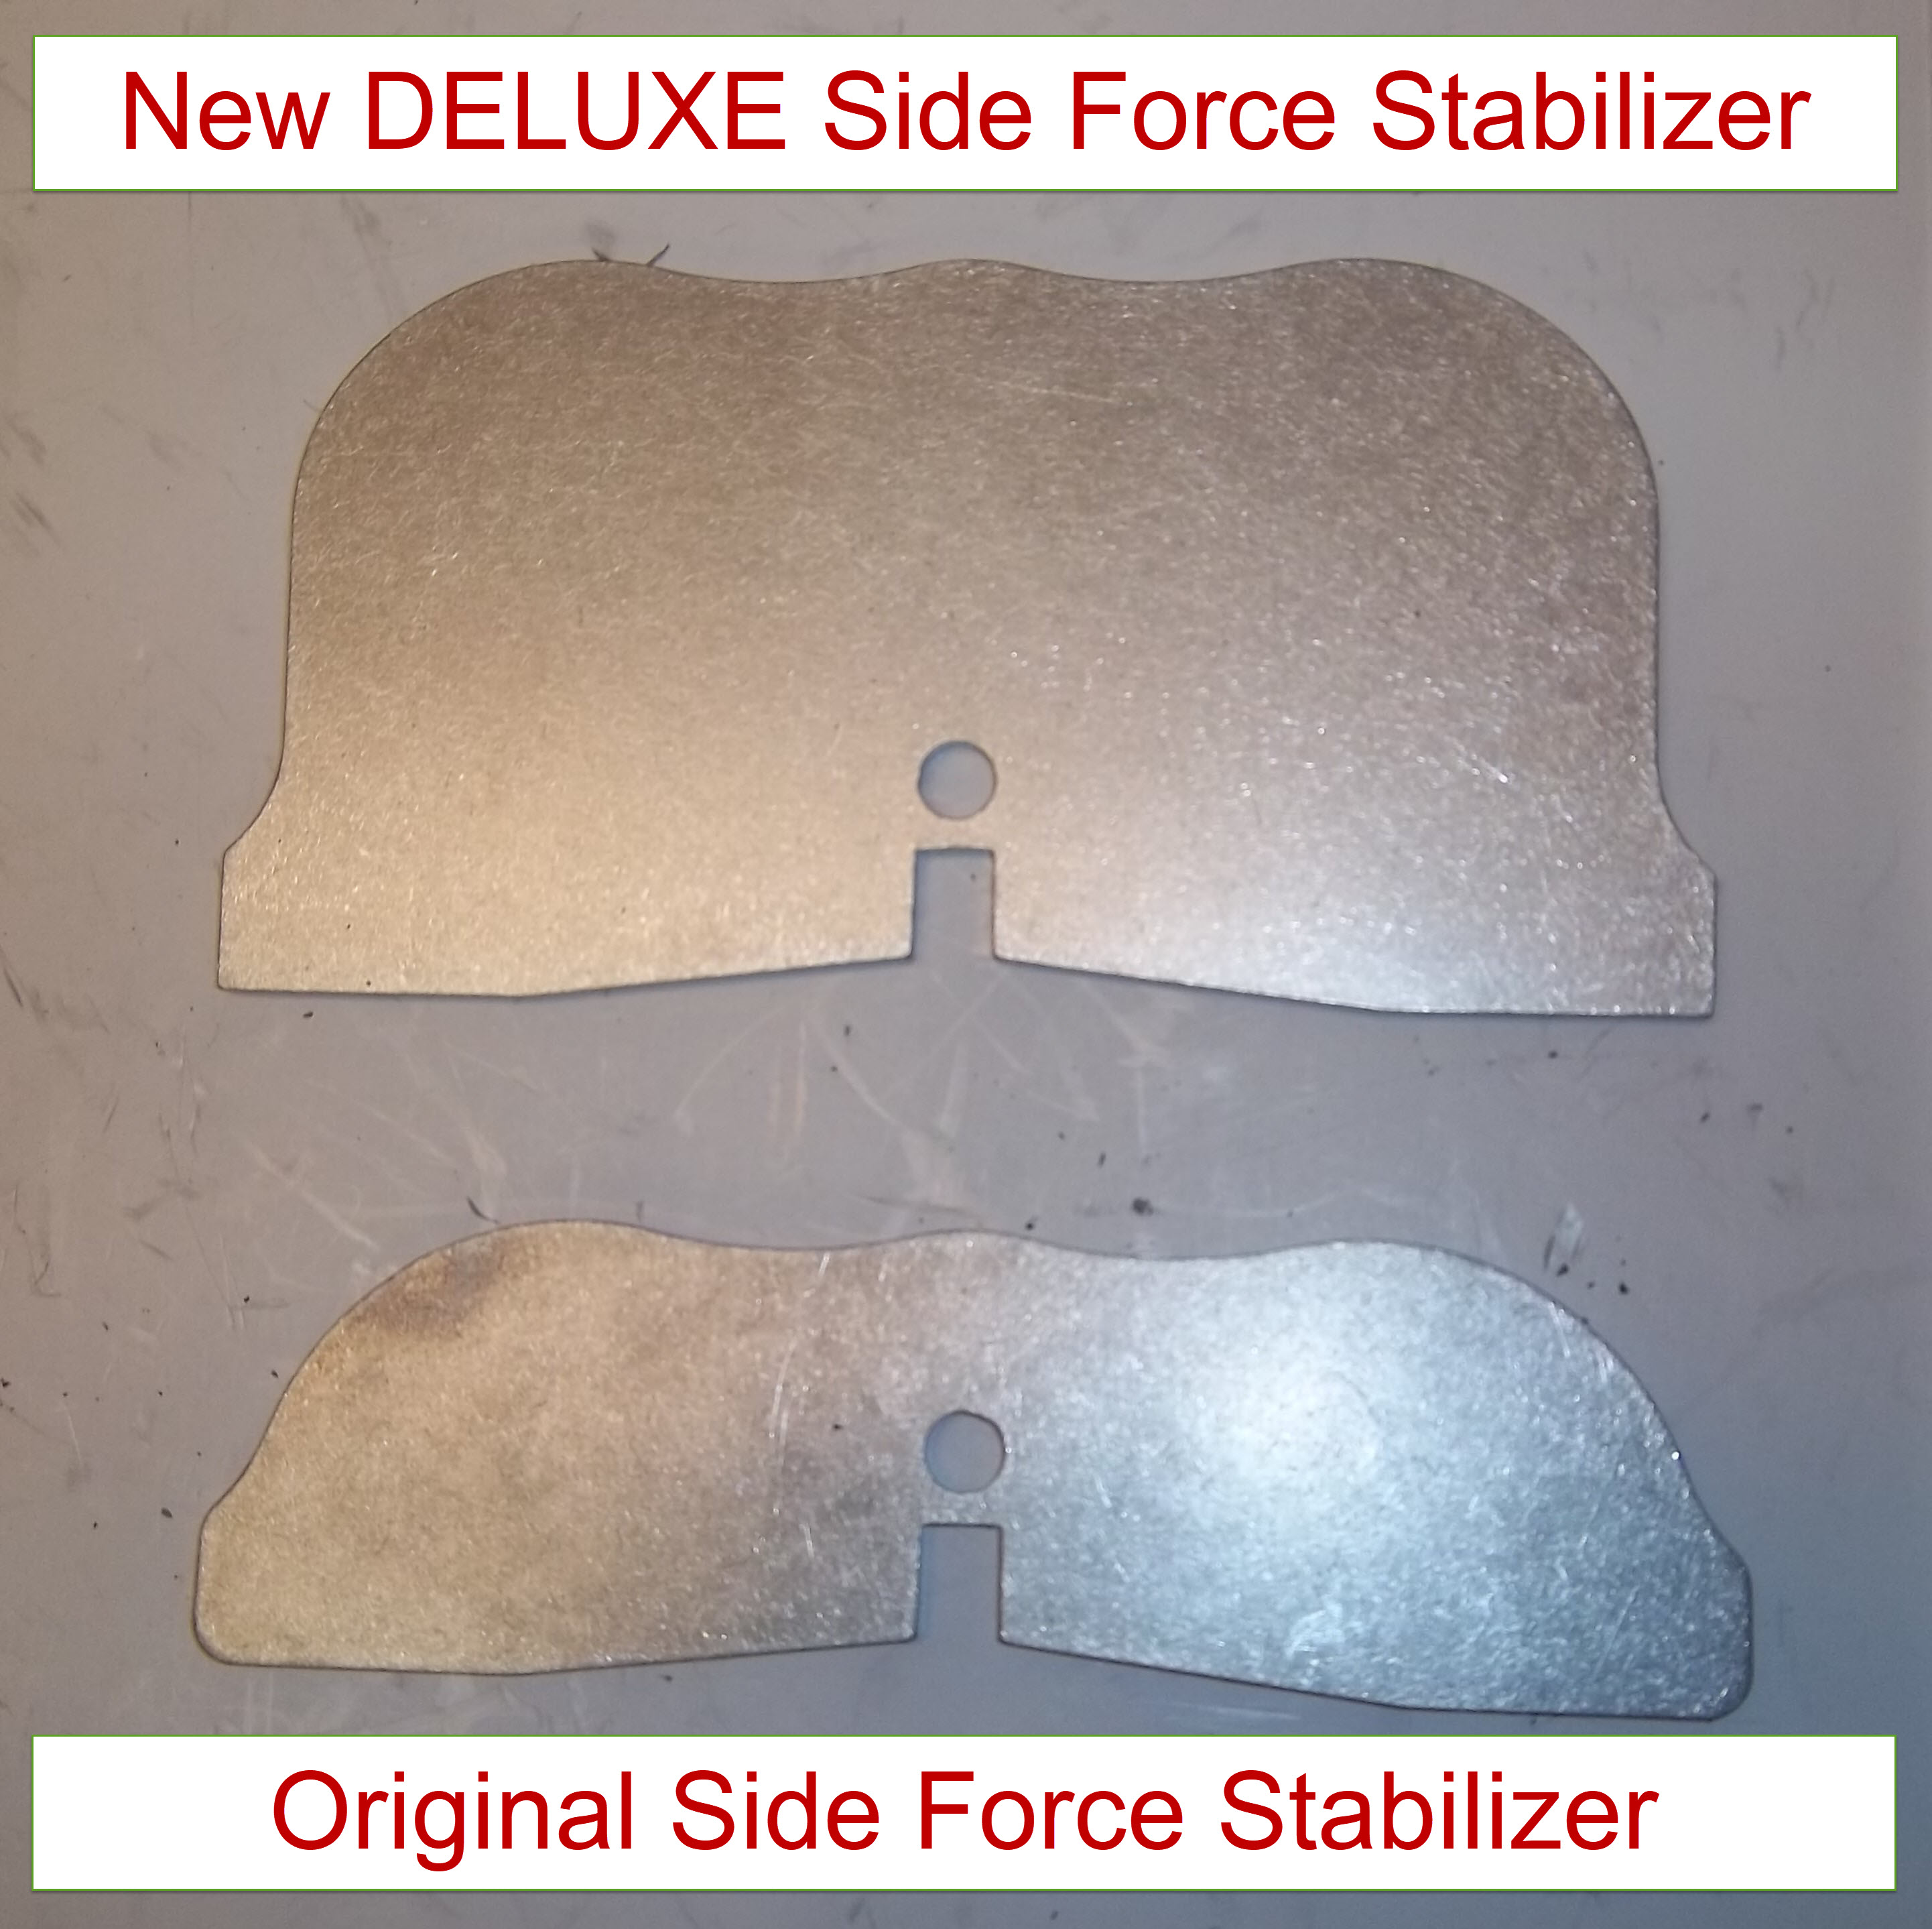 DELUXE Side Force Stabilizer comparison